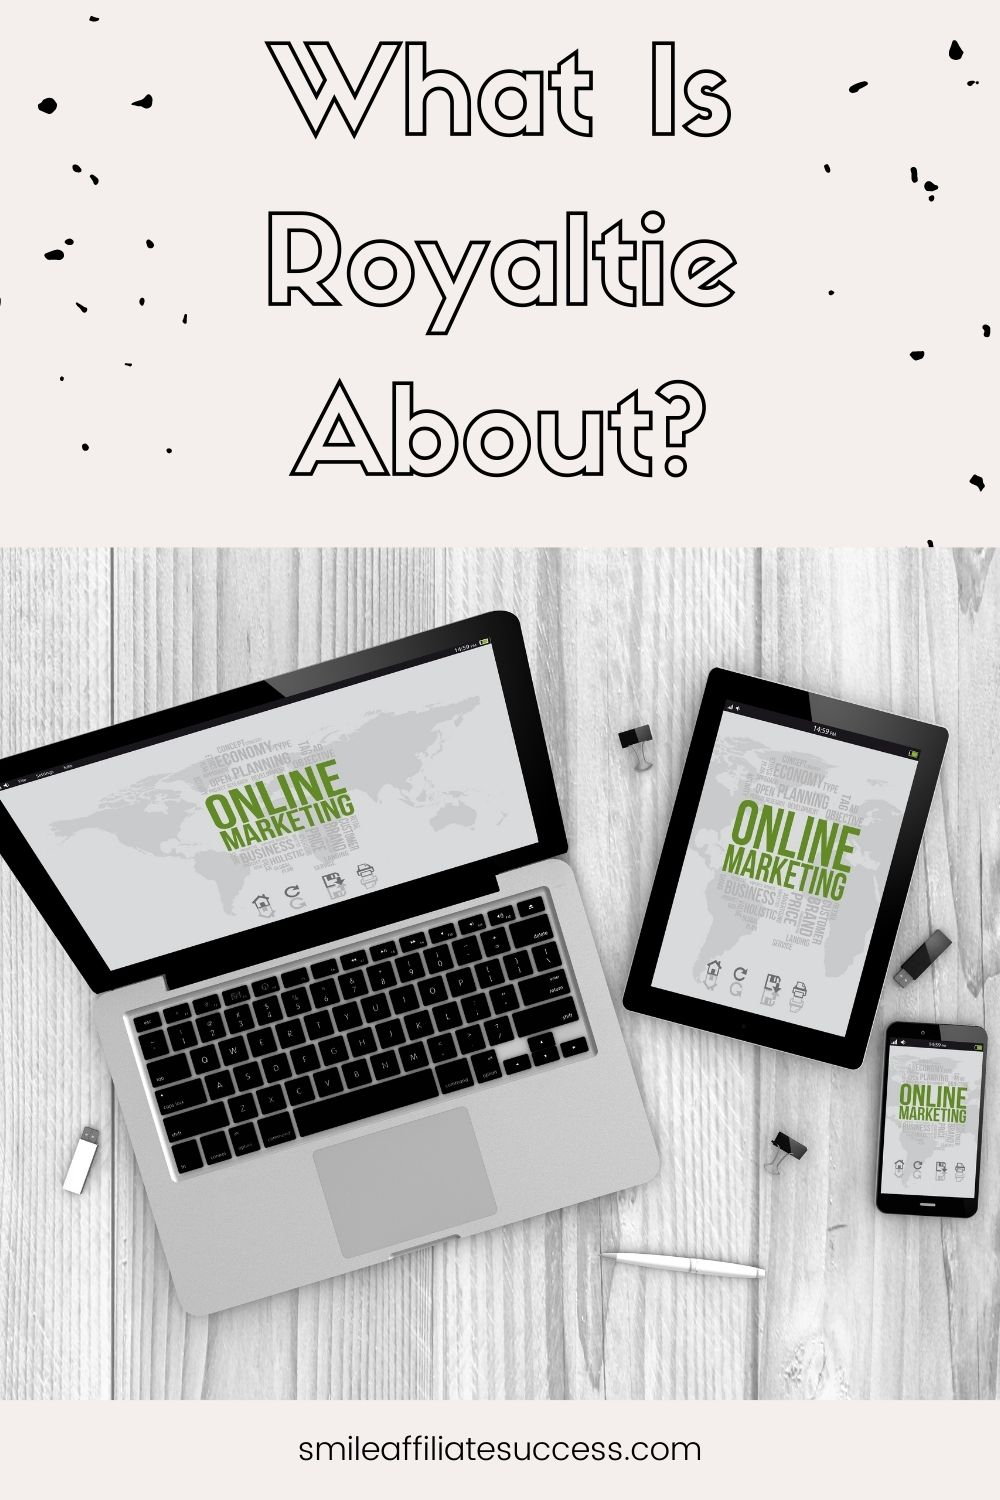 What Is Royaltie About?